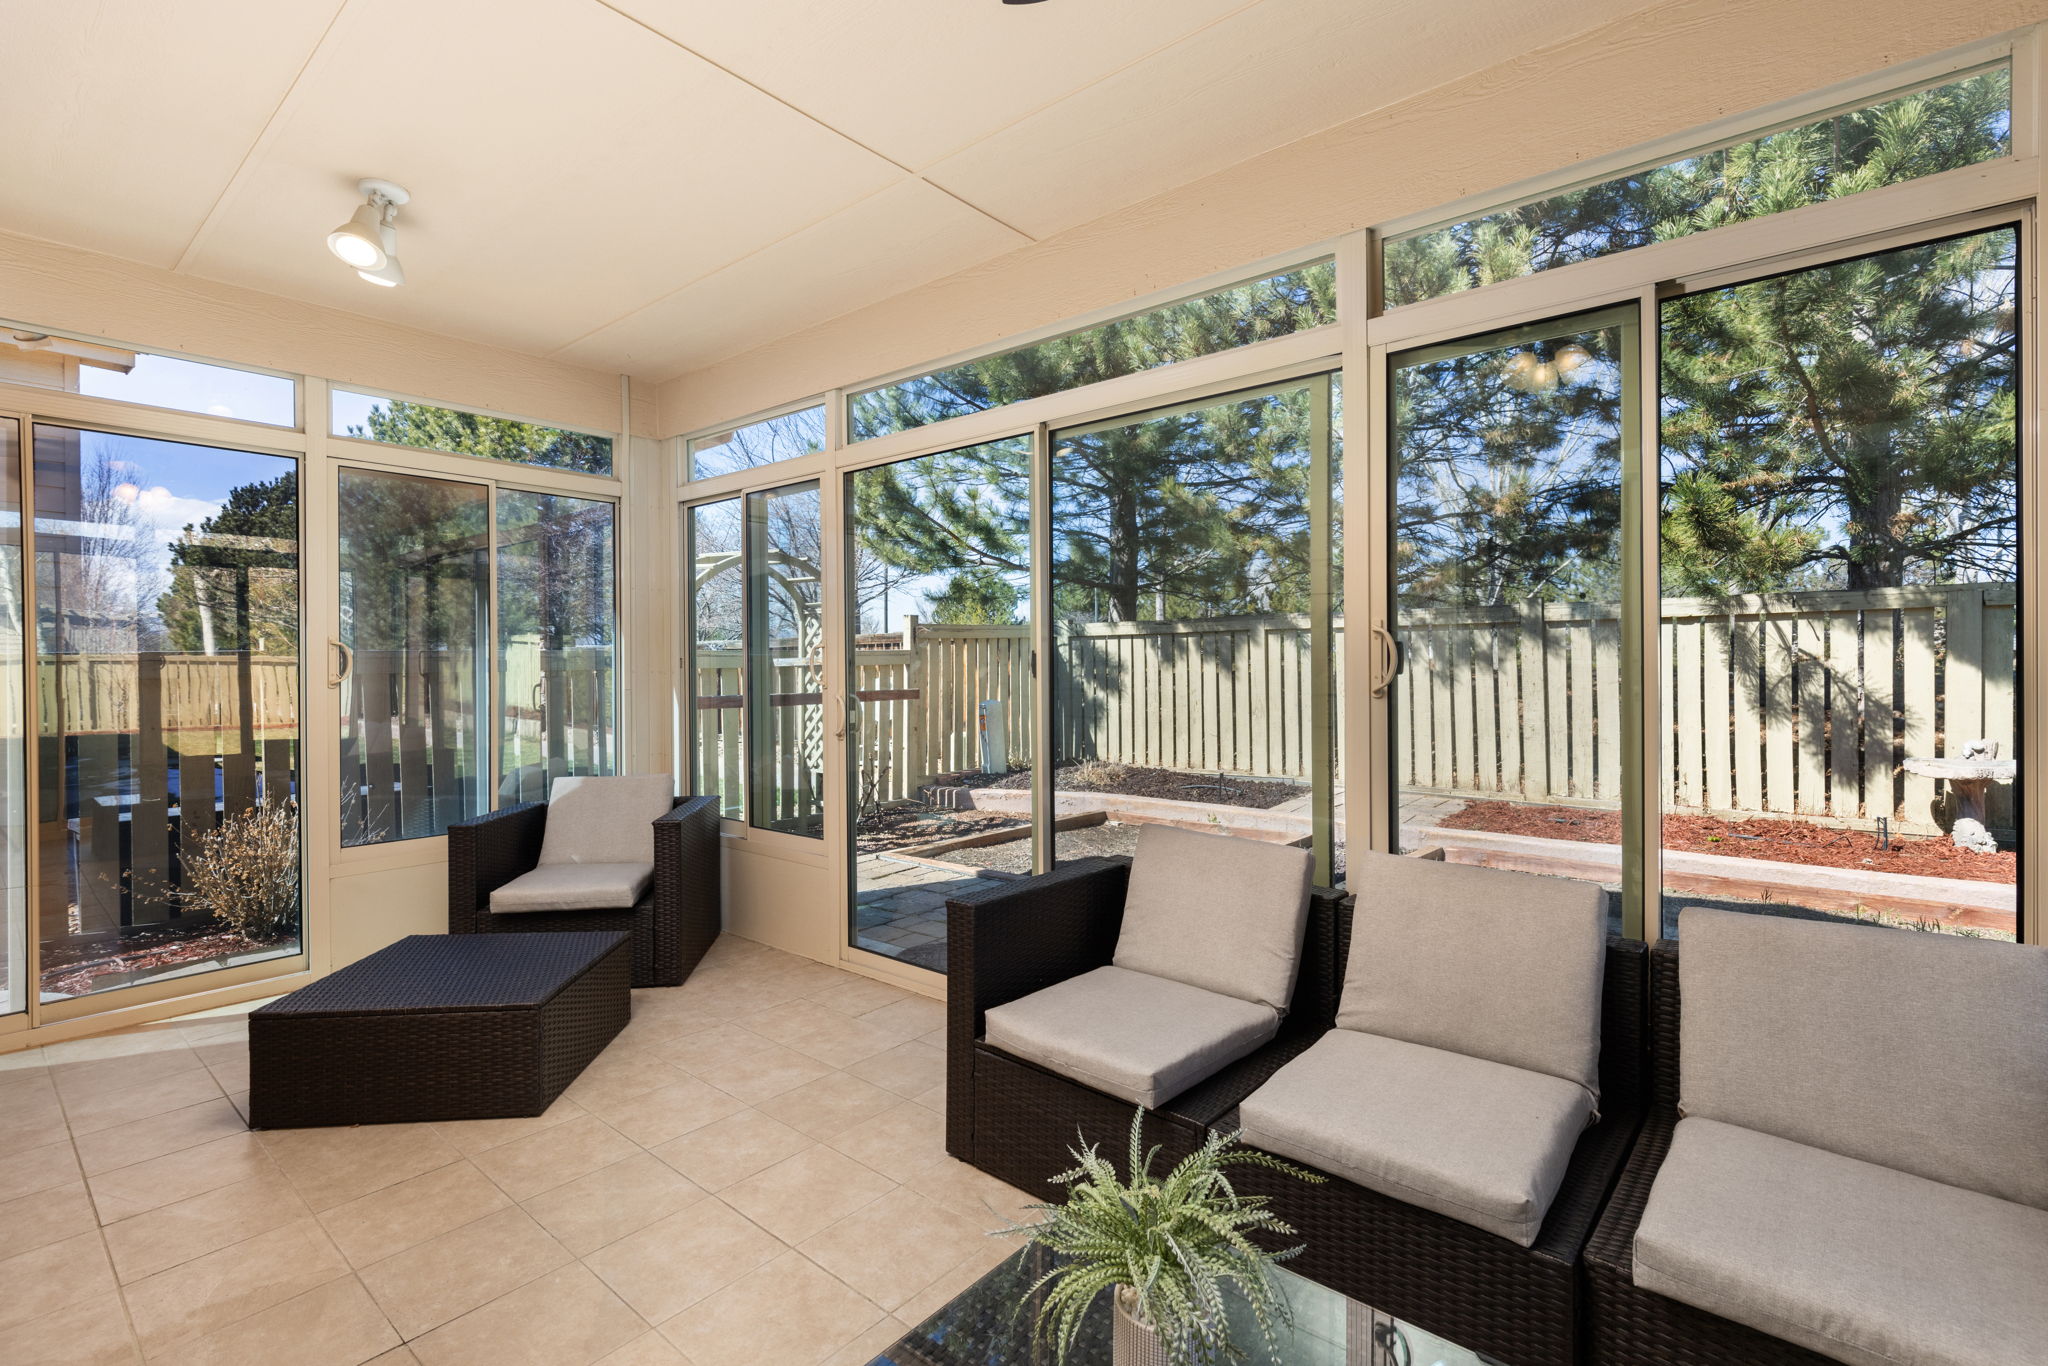 Relax & Enjoy your Enclosed Heated & Cooled Sunroom